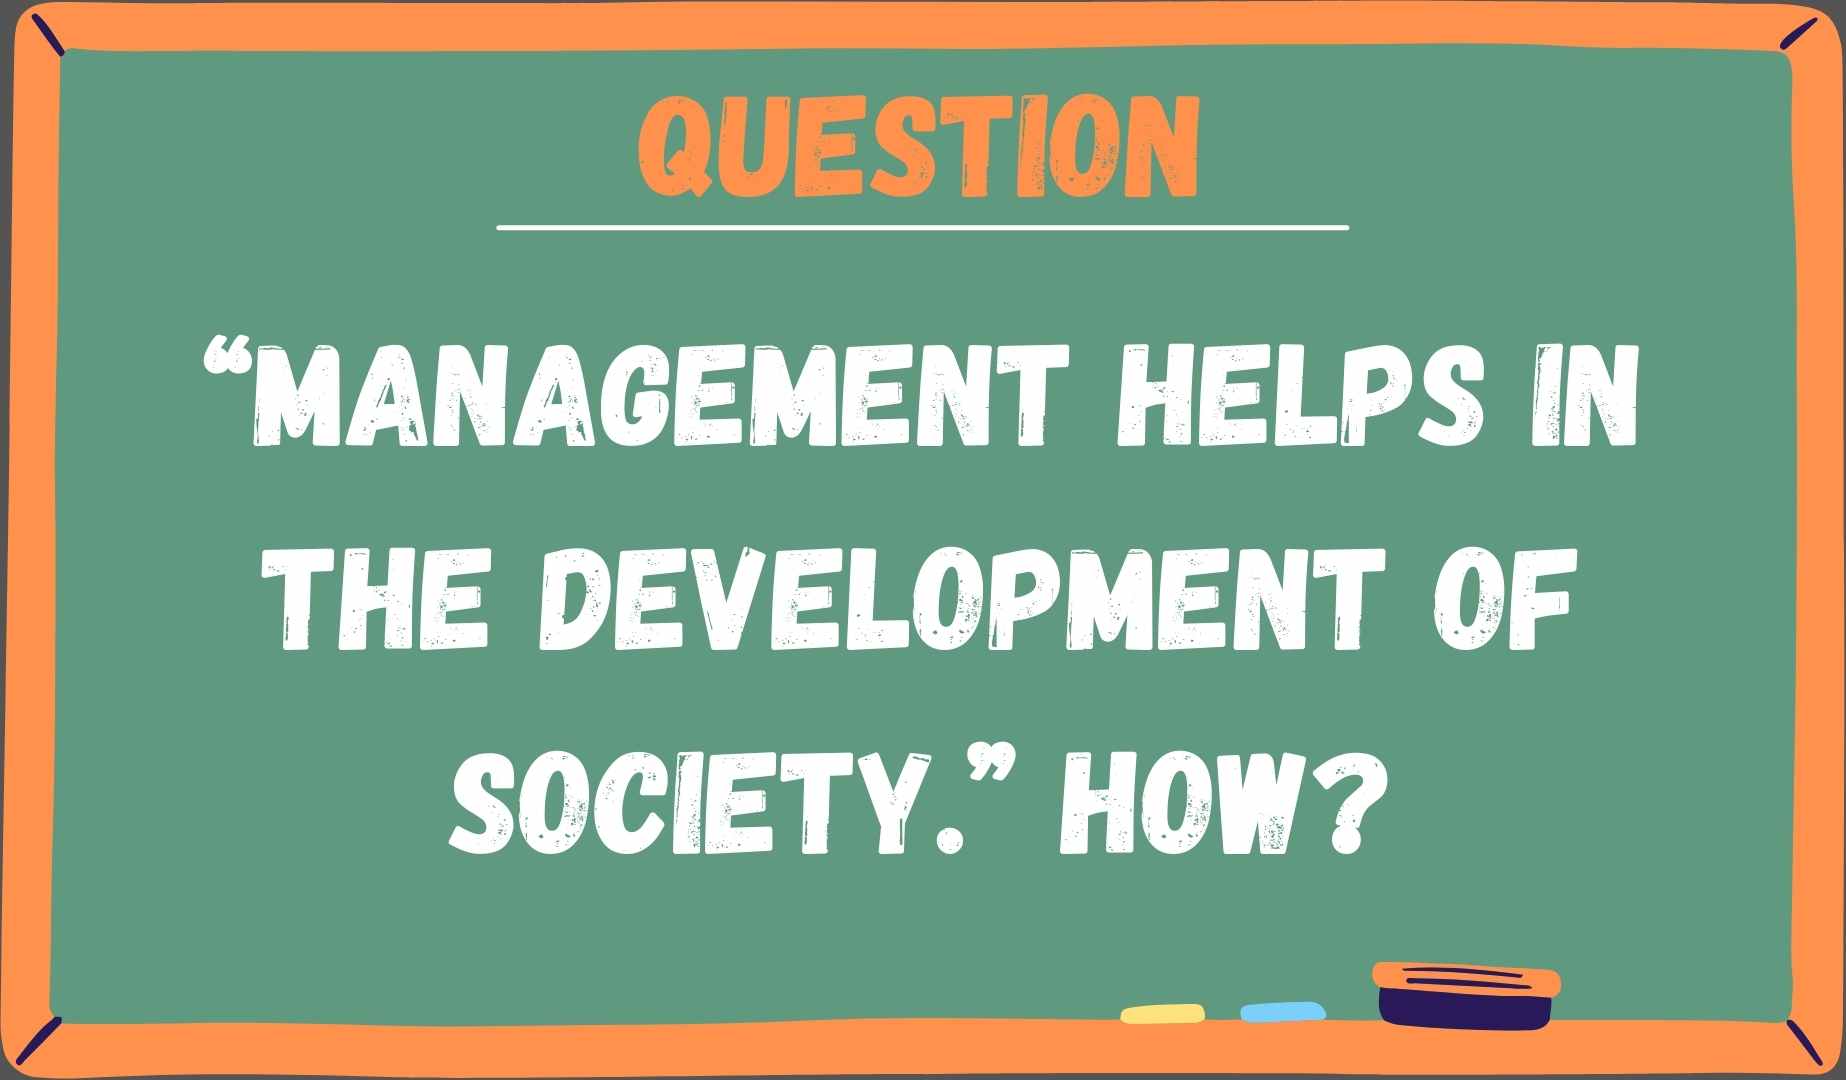 'Management helps in the development of society.' How?